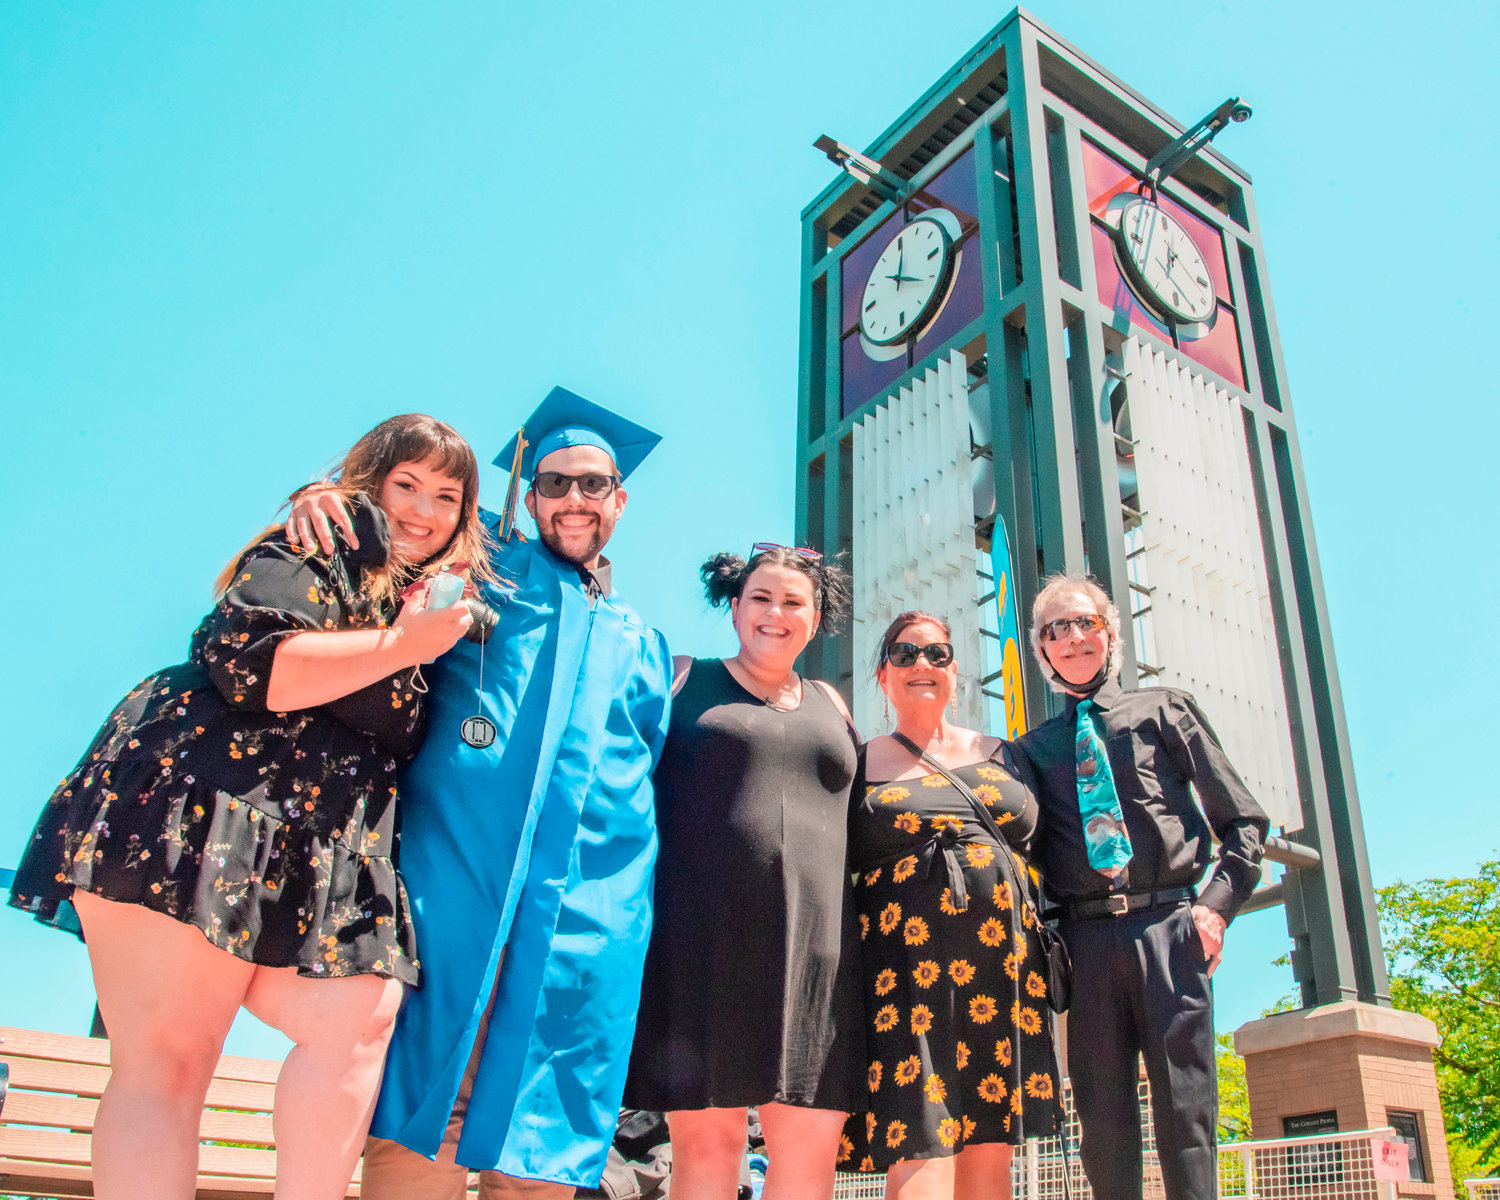 Taylour Beigh poses for a photo with his girlfriend Kelsie, sister Brittany, and parents Linda and Stan in front of the Centralia College clock tower after receiving his diploma on Friday. . Centralia College hosted a modified in-person commencement ceremony from noon to 5:30 p.m. Friday. Each graduate was allotted a specific number of tickets. There was no seating at the event, and graduates left after getting diplomas.